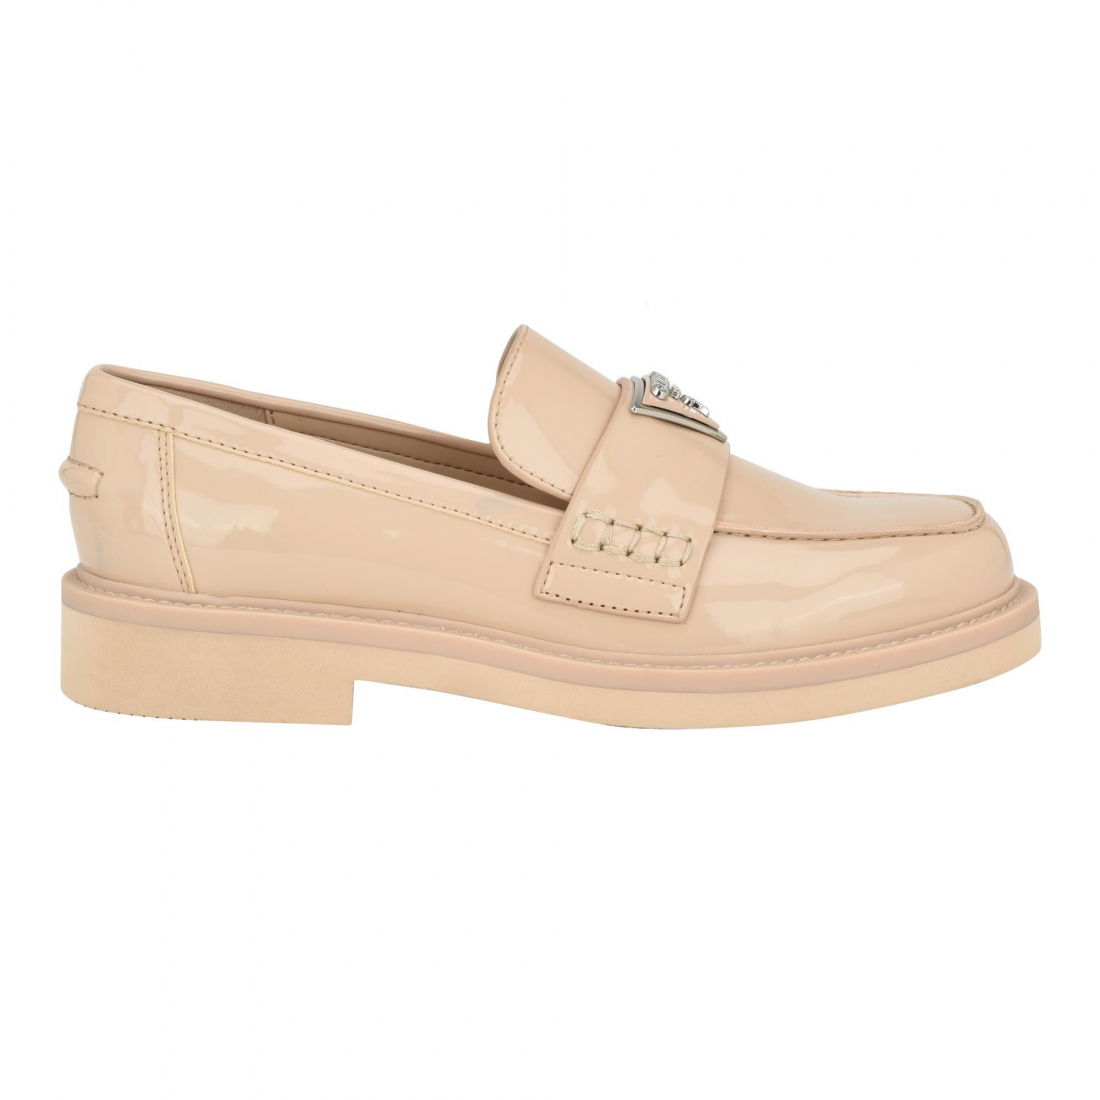 Women's 'Shatha' Loafers